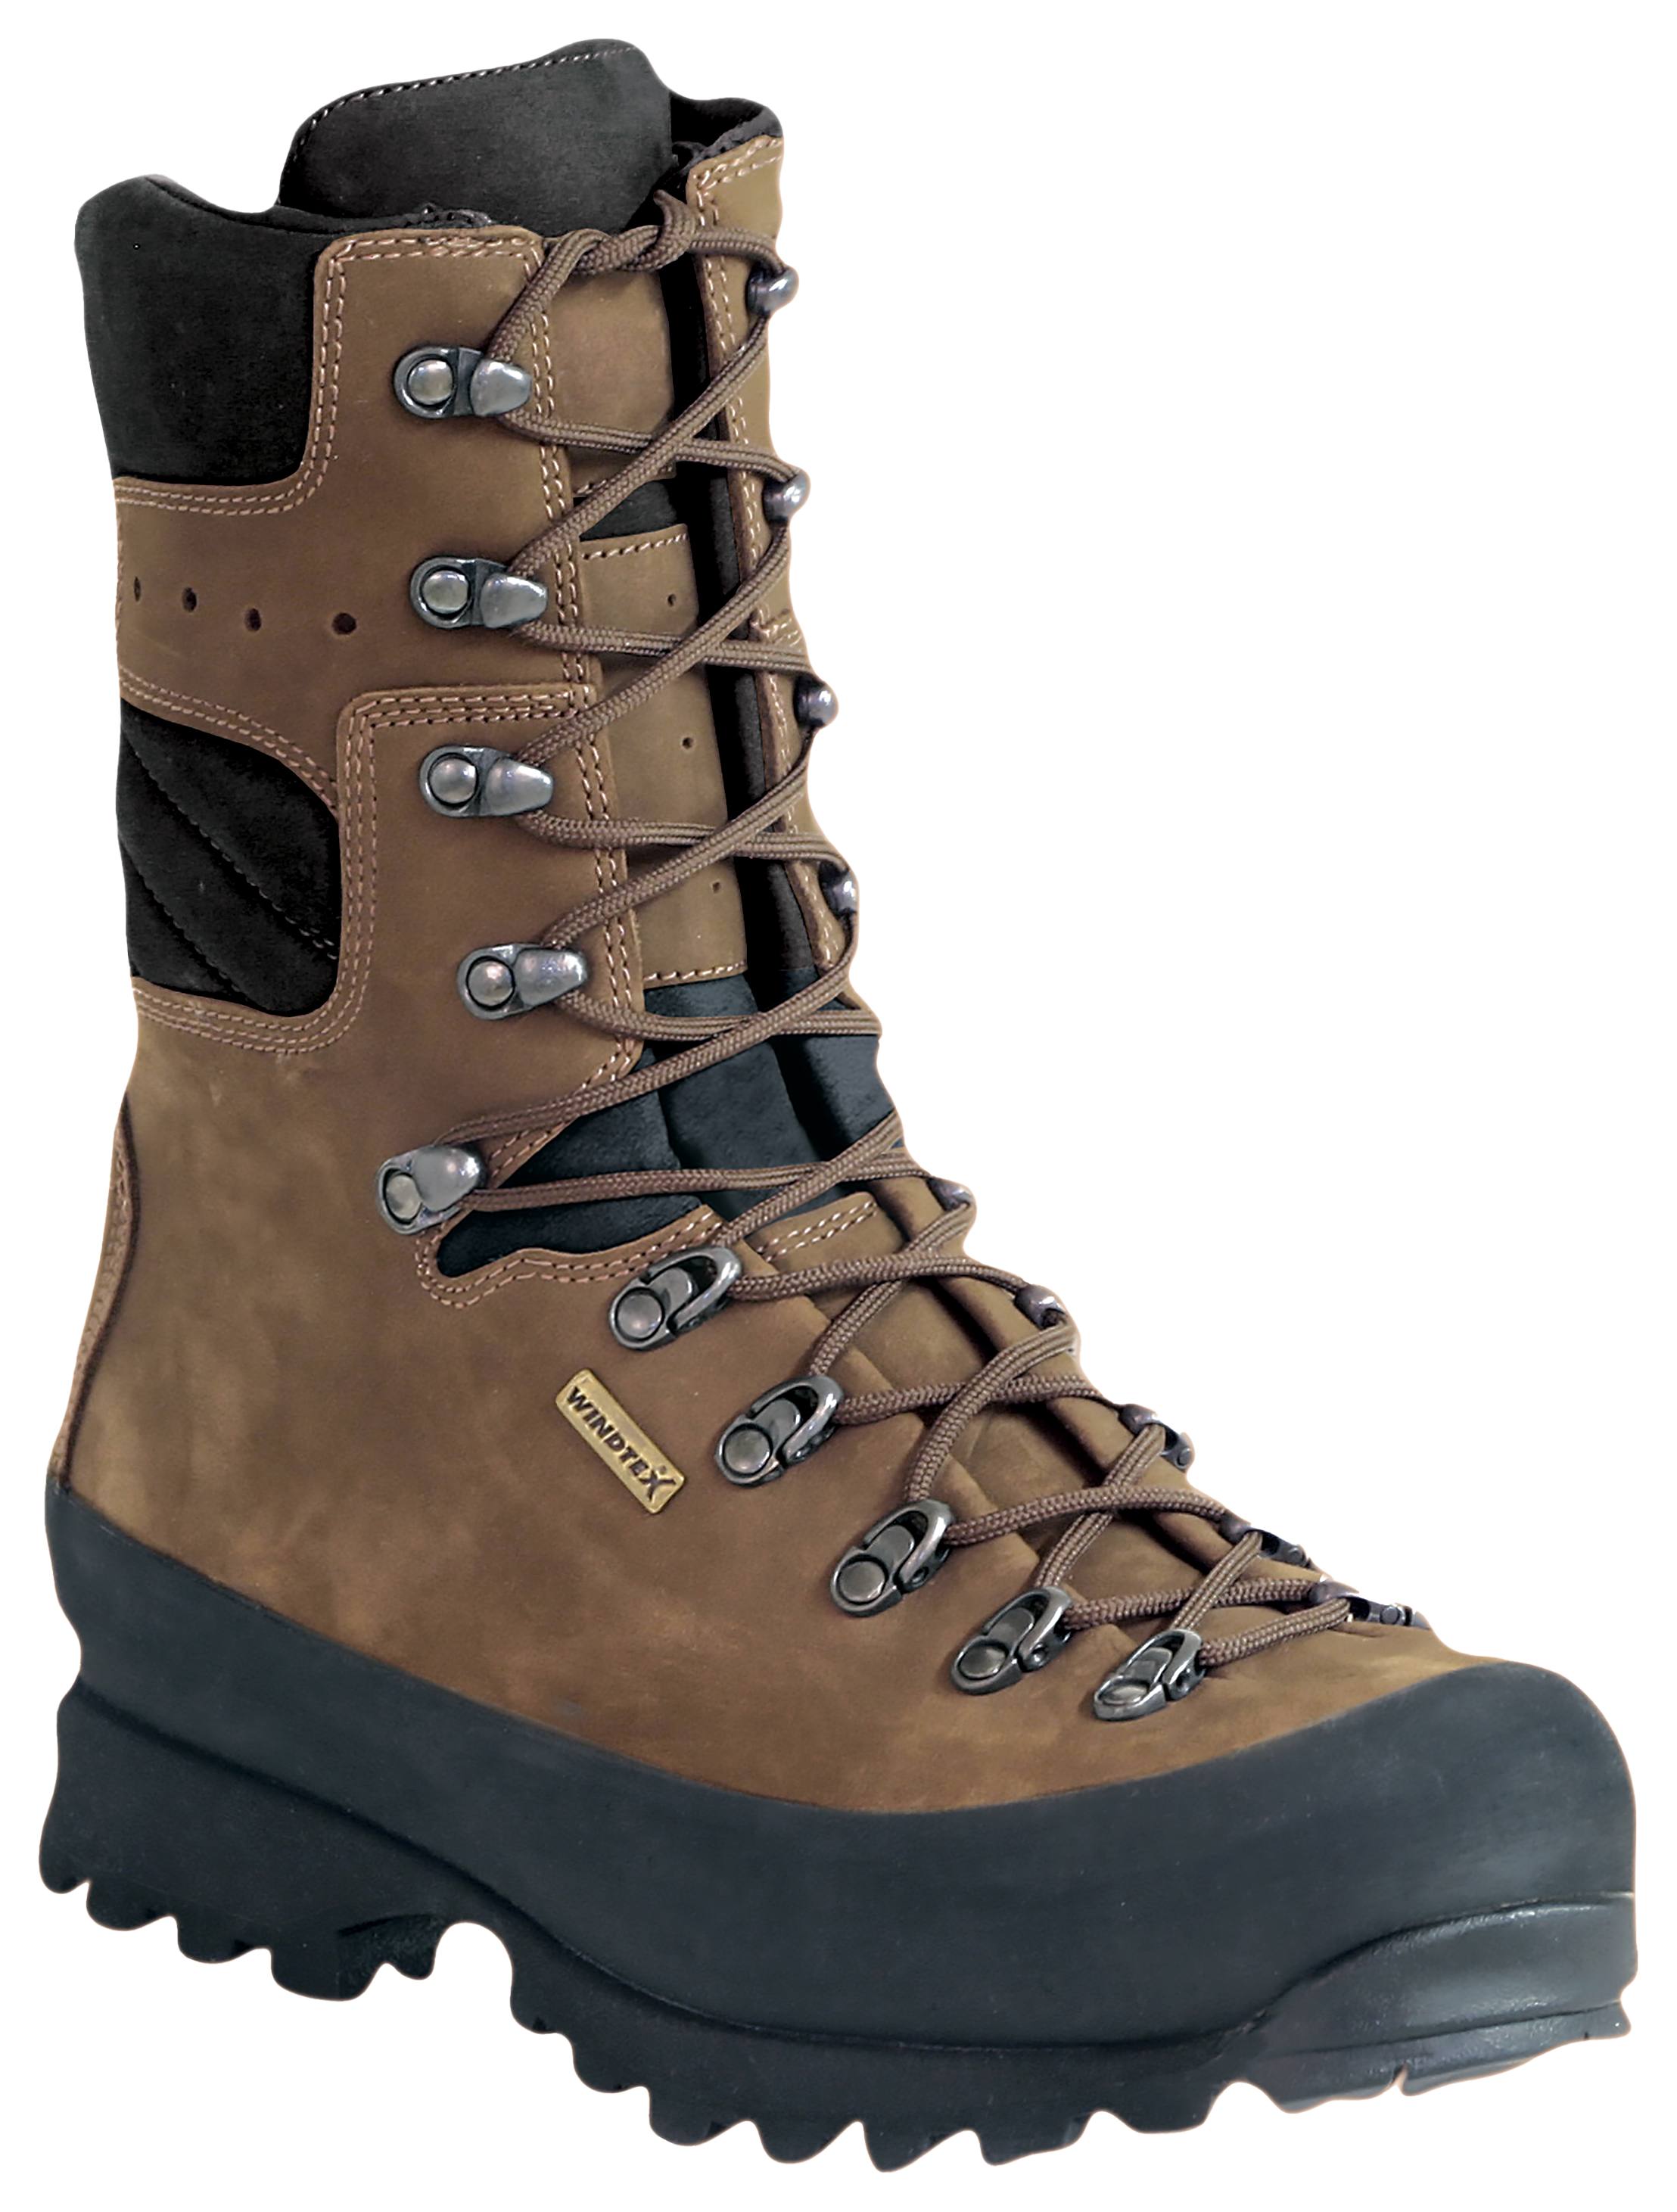 Kenetrek Mountain Extreme 1000 Insulated Waterproof Hunting Boots for Men - Brown - 8M